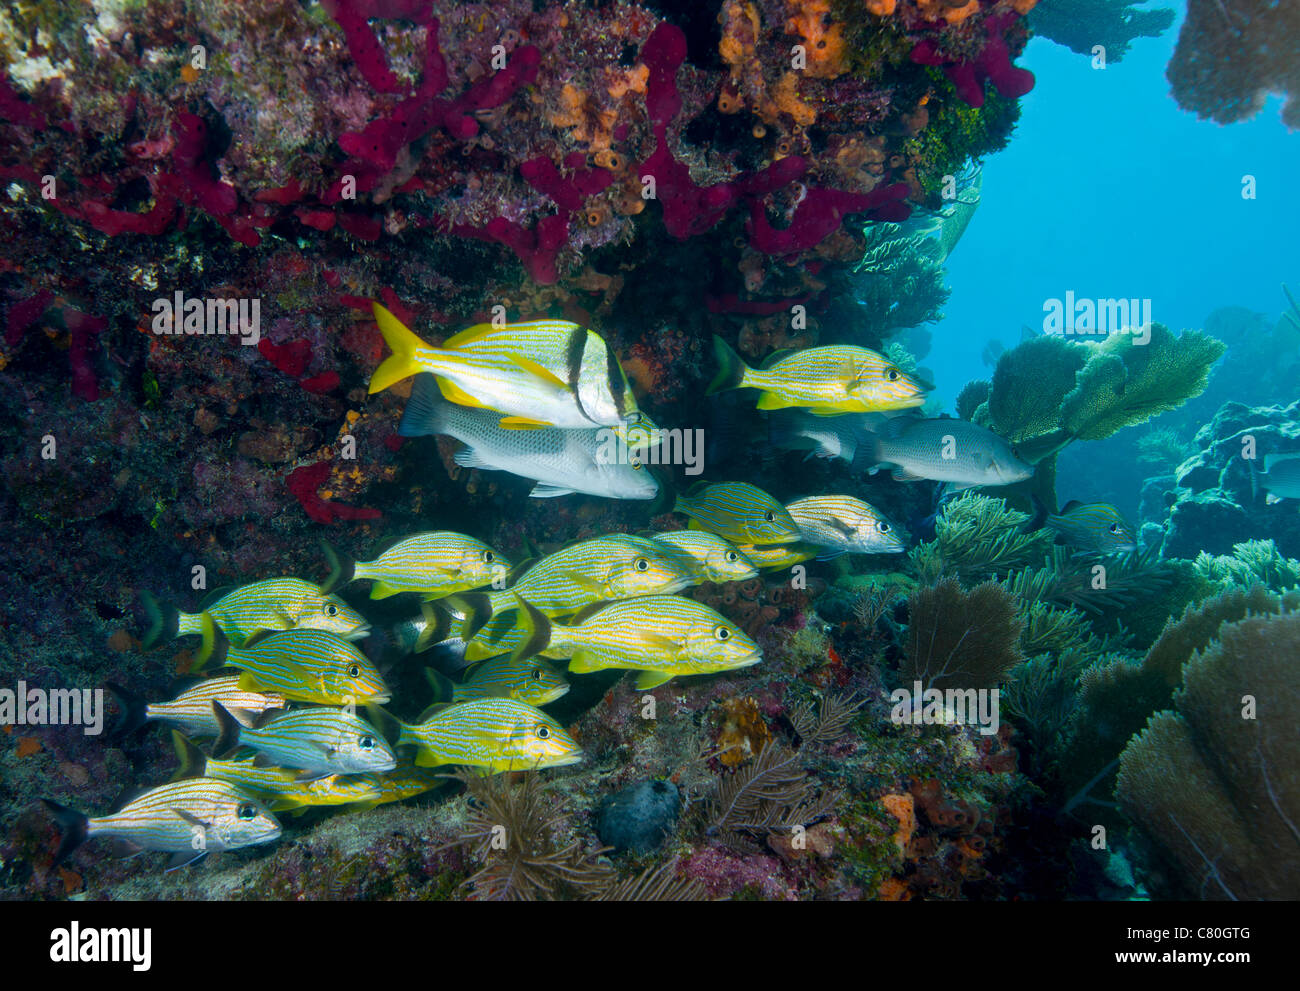 A diversity of grunt fish under a colorful coral reef, Key Largo, Florida. Stock Photo